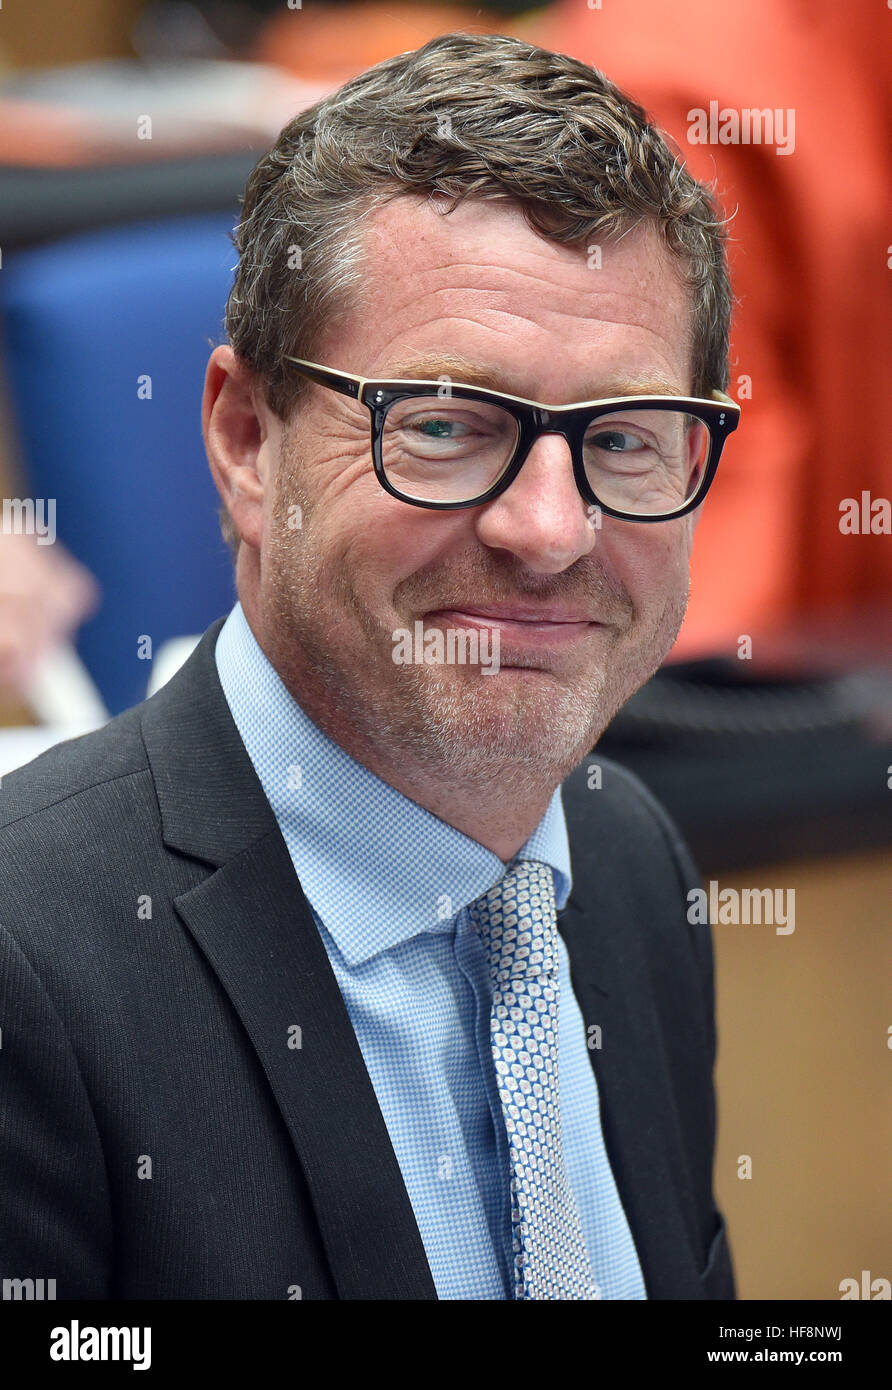 Bonn, Germany. 13th June, 2016. Publisher of the German tabloid 'Bild', Kai Diekmann, attends the awarding of the 'Freedom of Speech Award' to the editor in chief of the Turkish newspaper 'Huerriyet', Sedat Ergin, during the Deutsche Welle Global Media Forum in Bonn, Germany, 13 June 2016. Photo: Henning Kaiser/dpa | usage worldwide/dpa/Alamy Live News Stock Photo